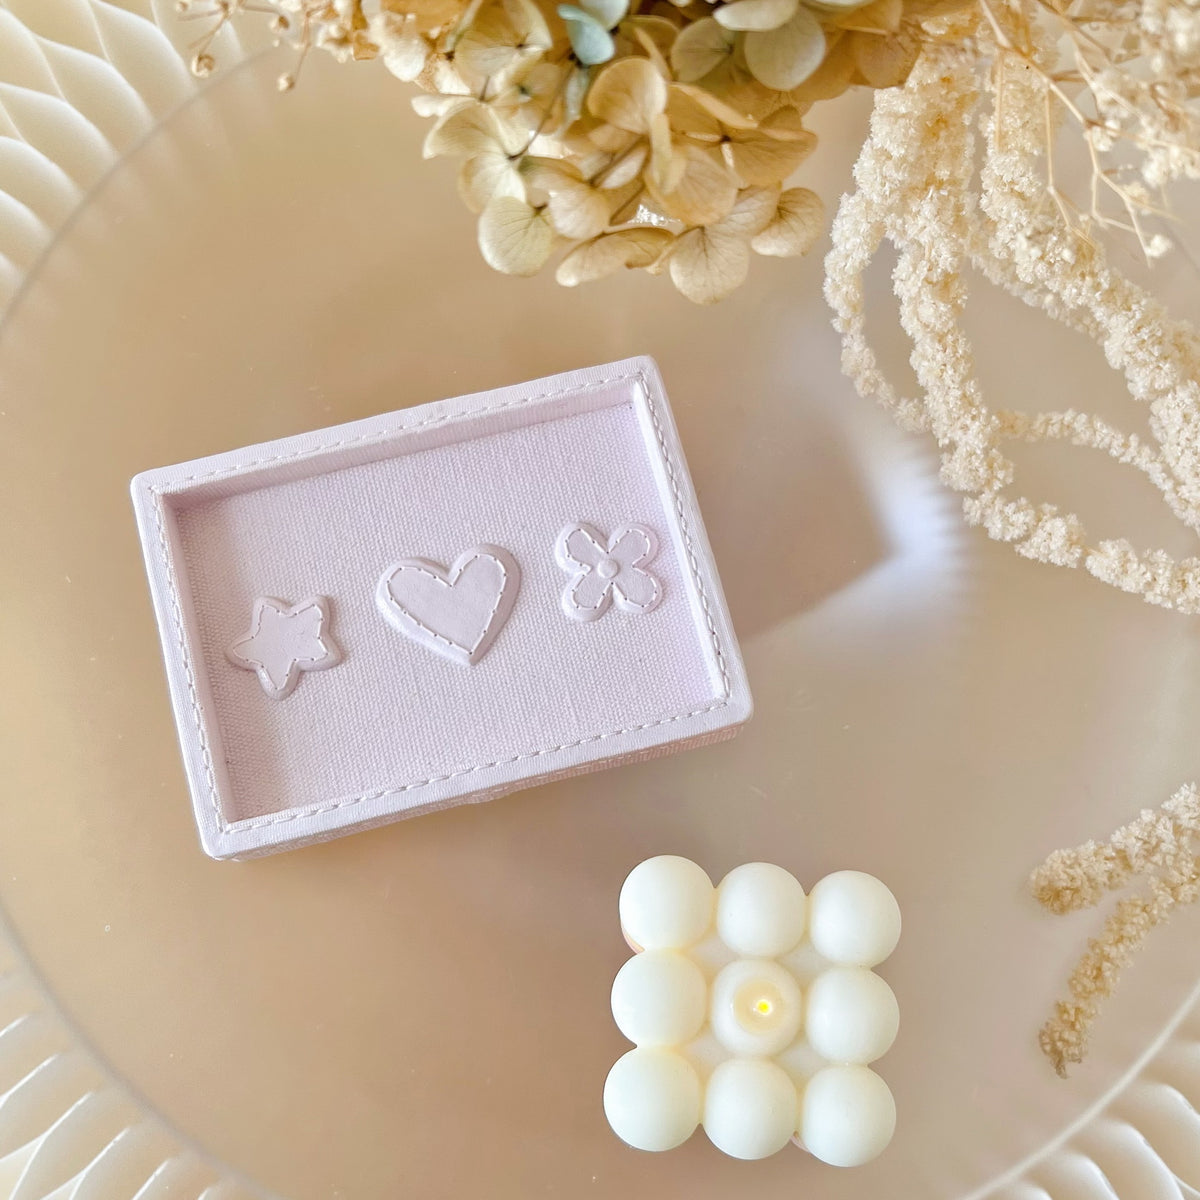 Handcrafted Cute Rectangular Decorative Trinket Dish - LMJ Candles